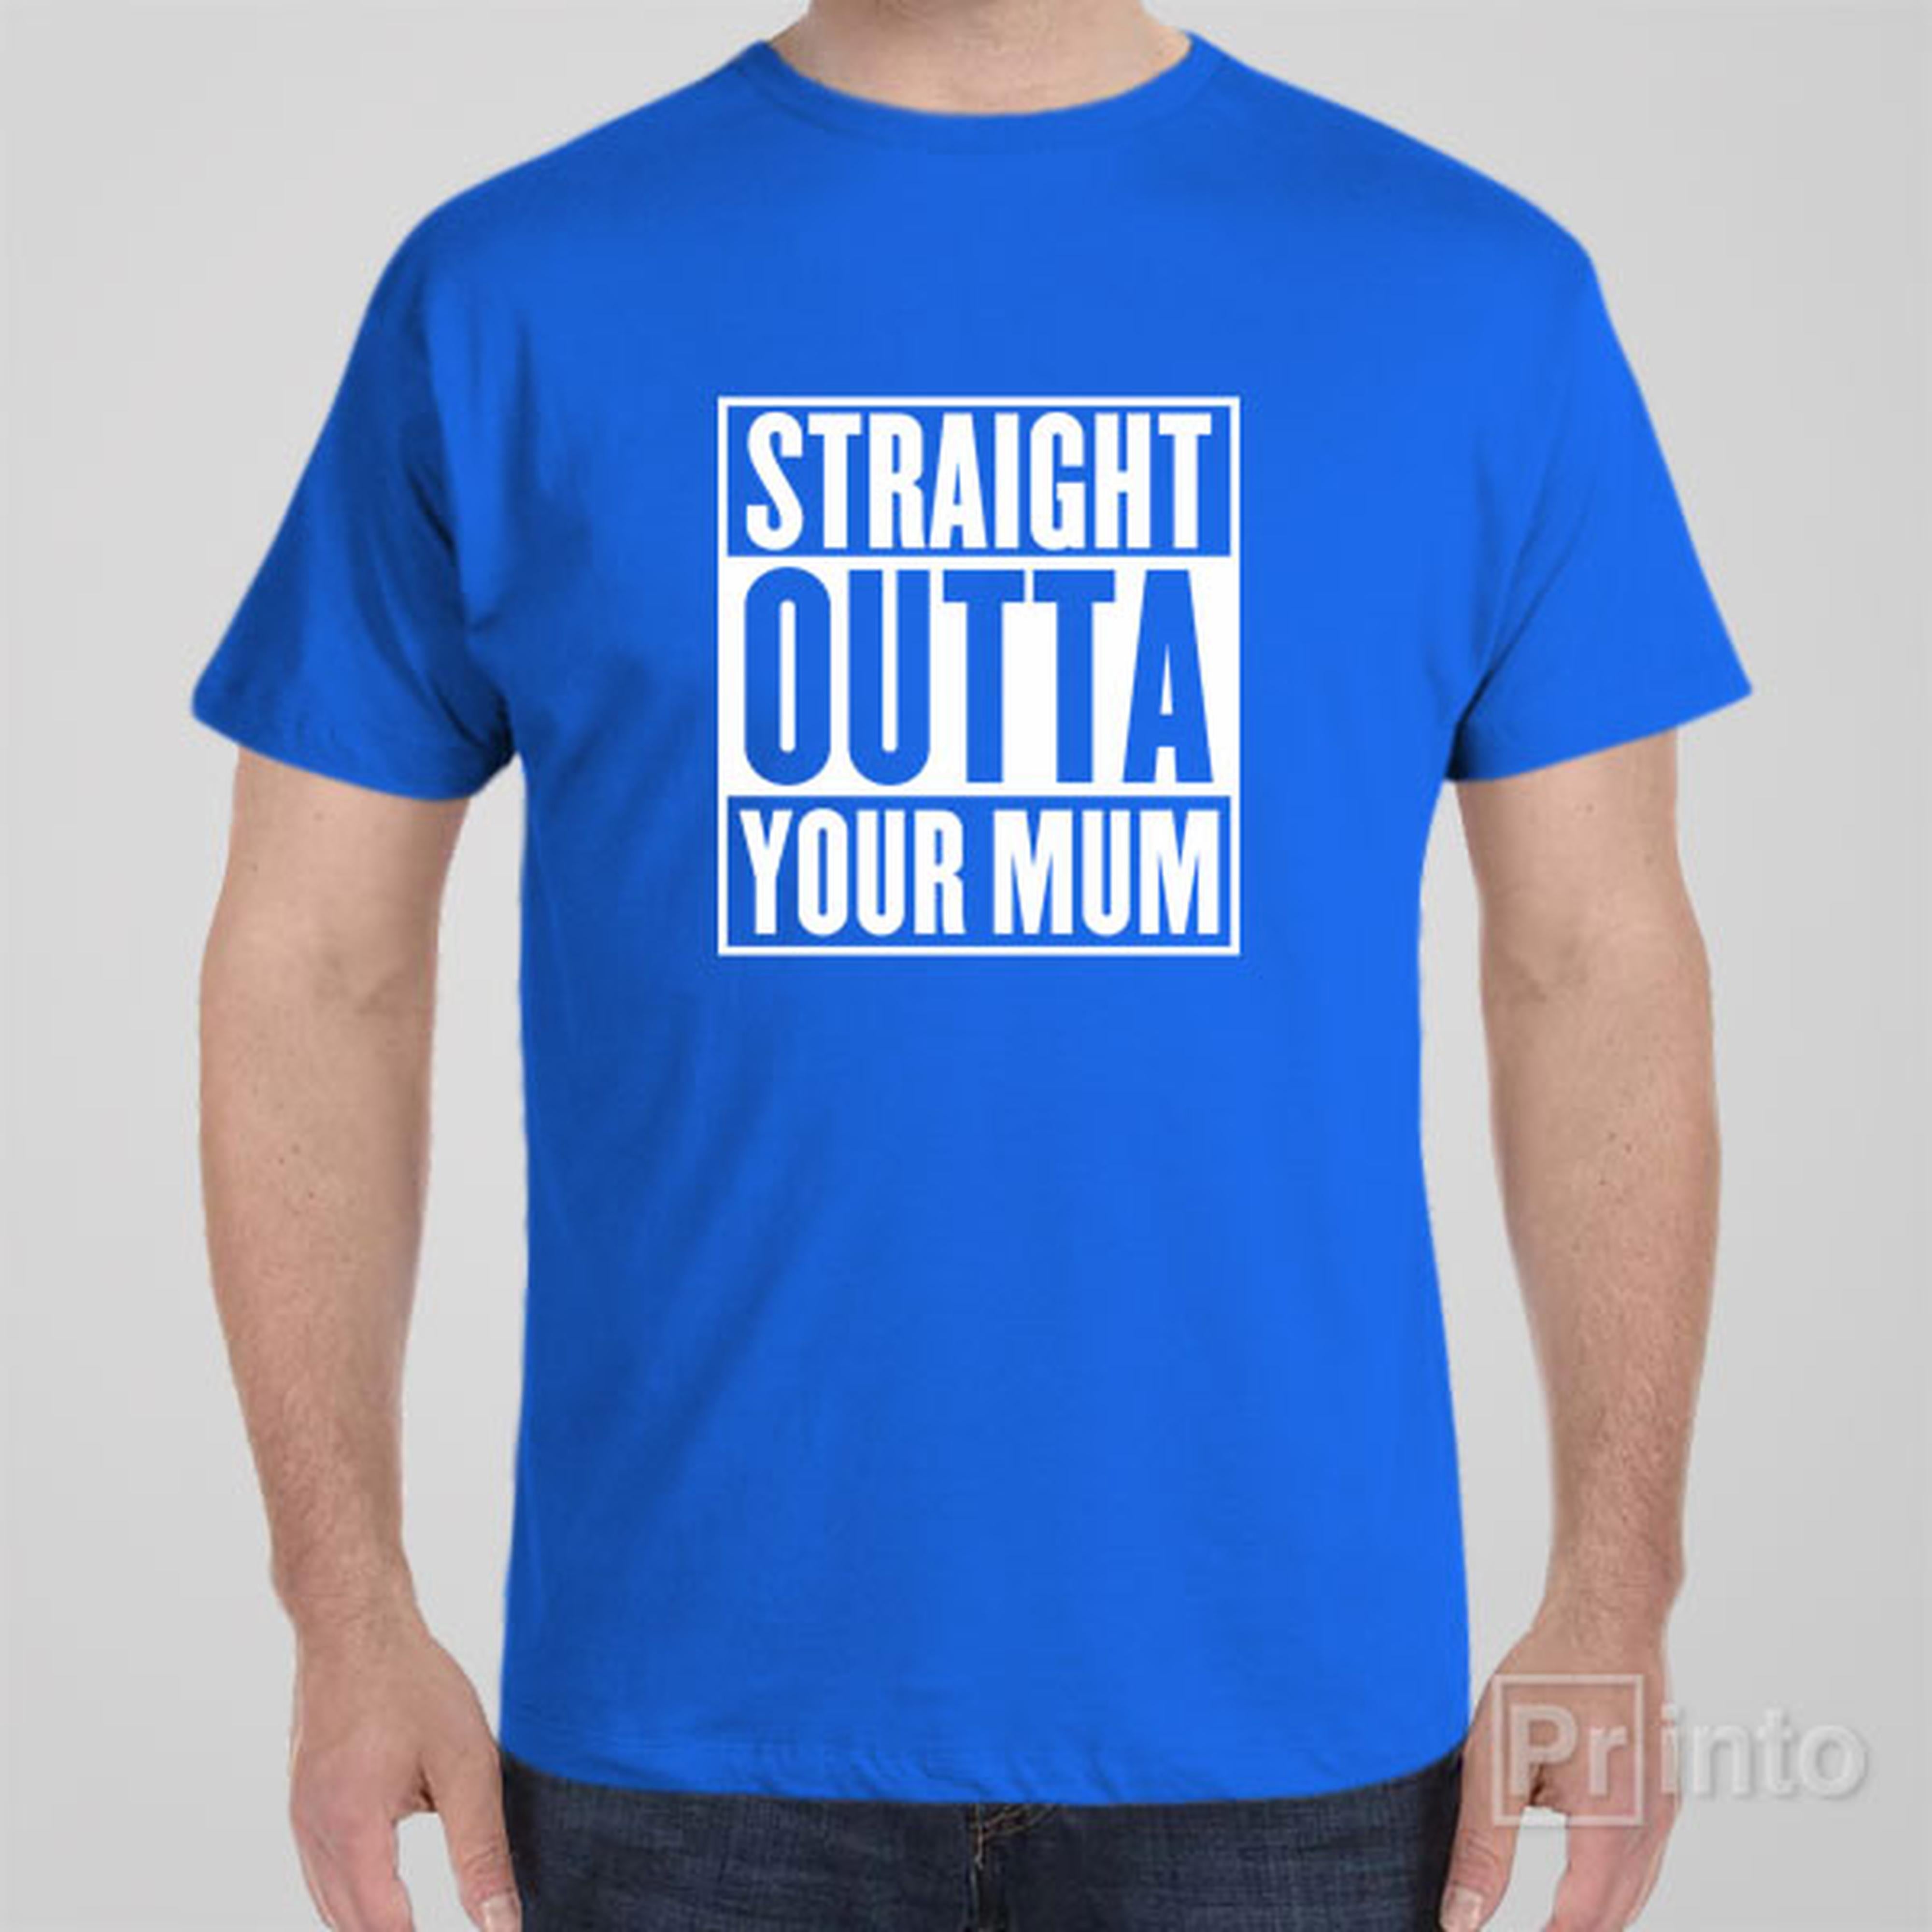 straight-outta-your-mum-t-shirt